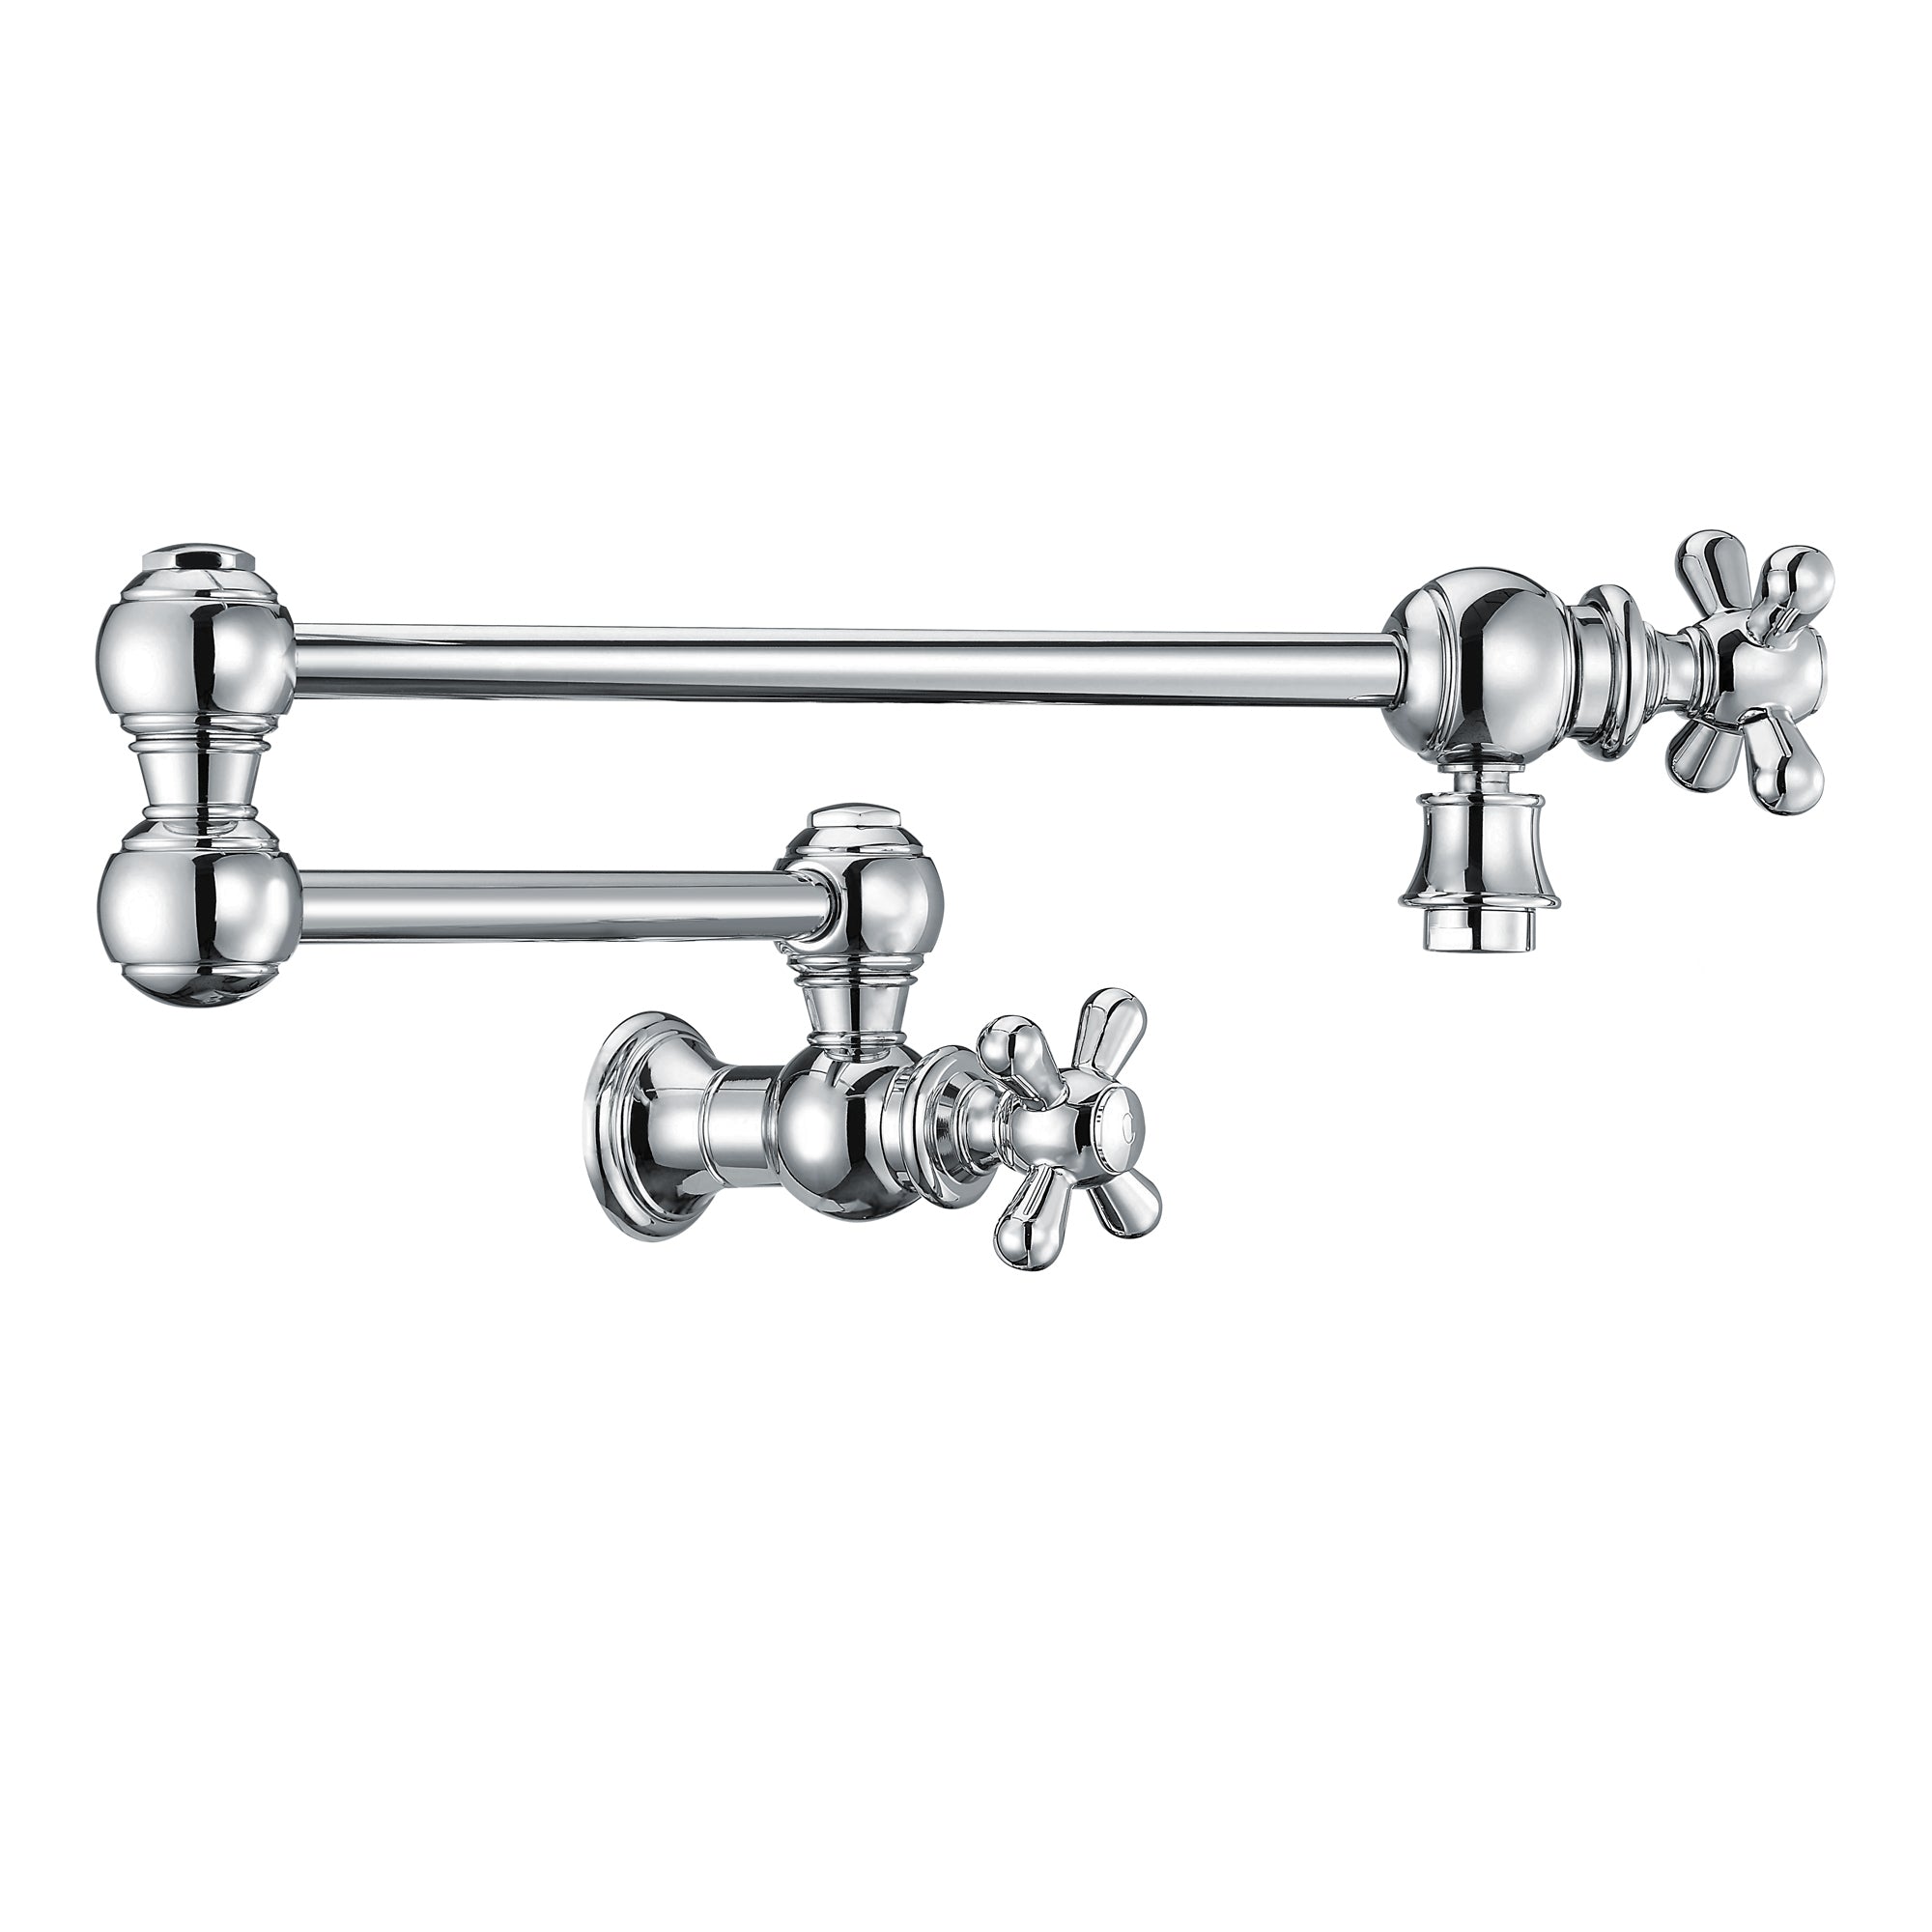 Wall Mount Retractable Swing Spout Pot Filler with Cross Handles